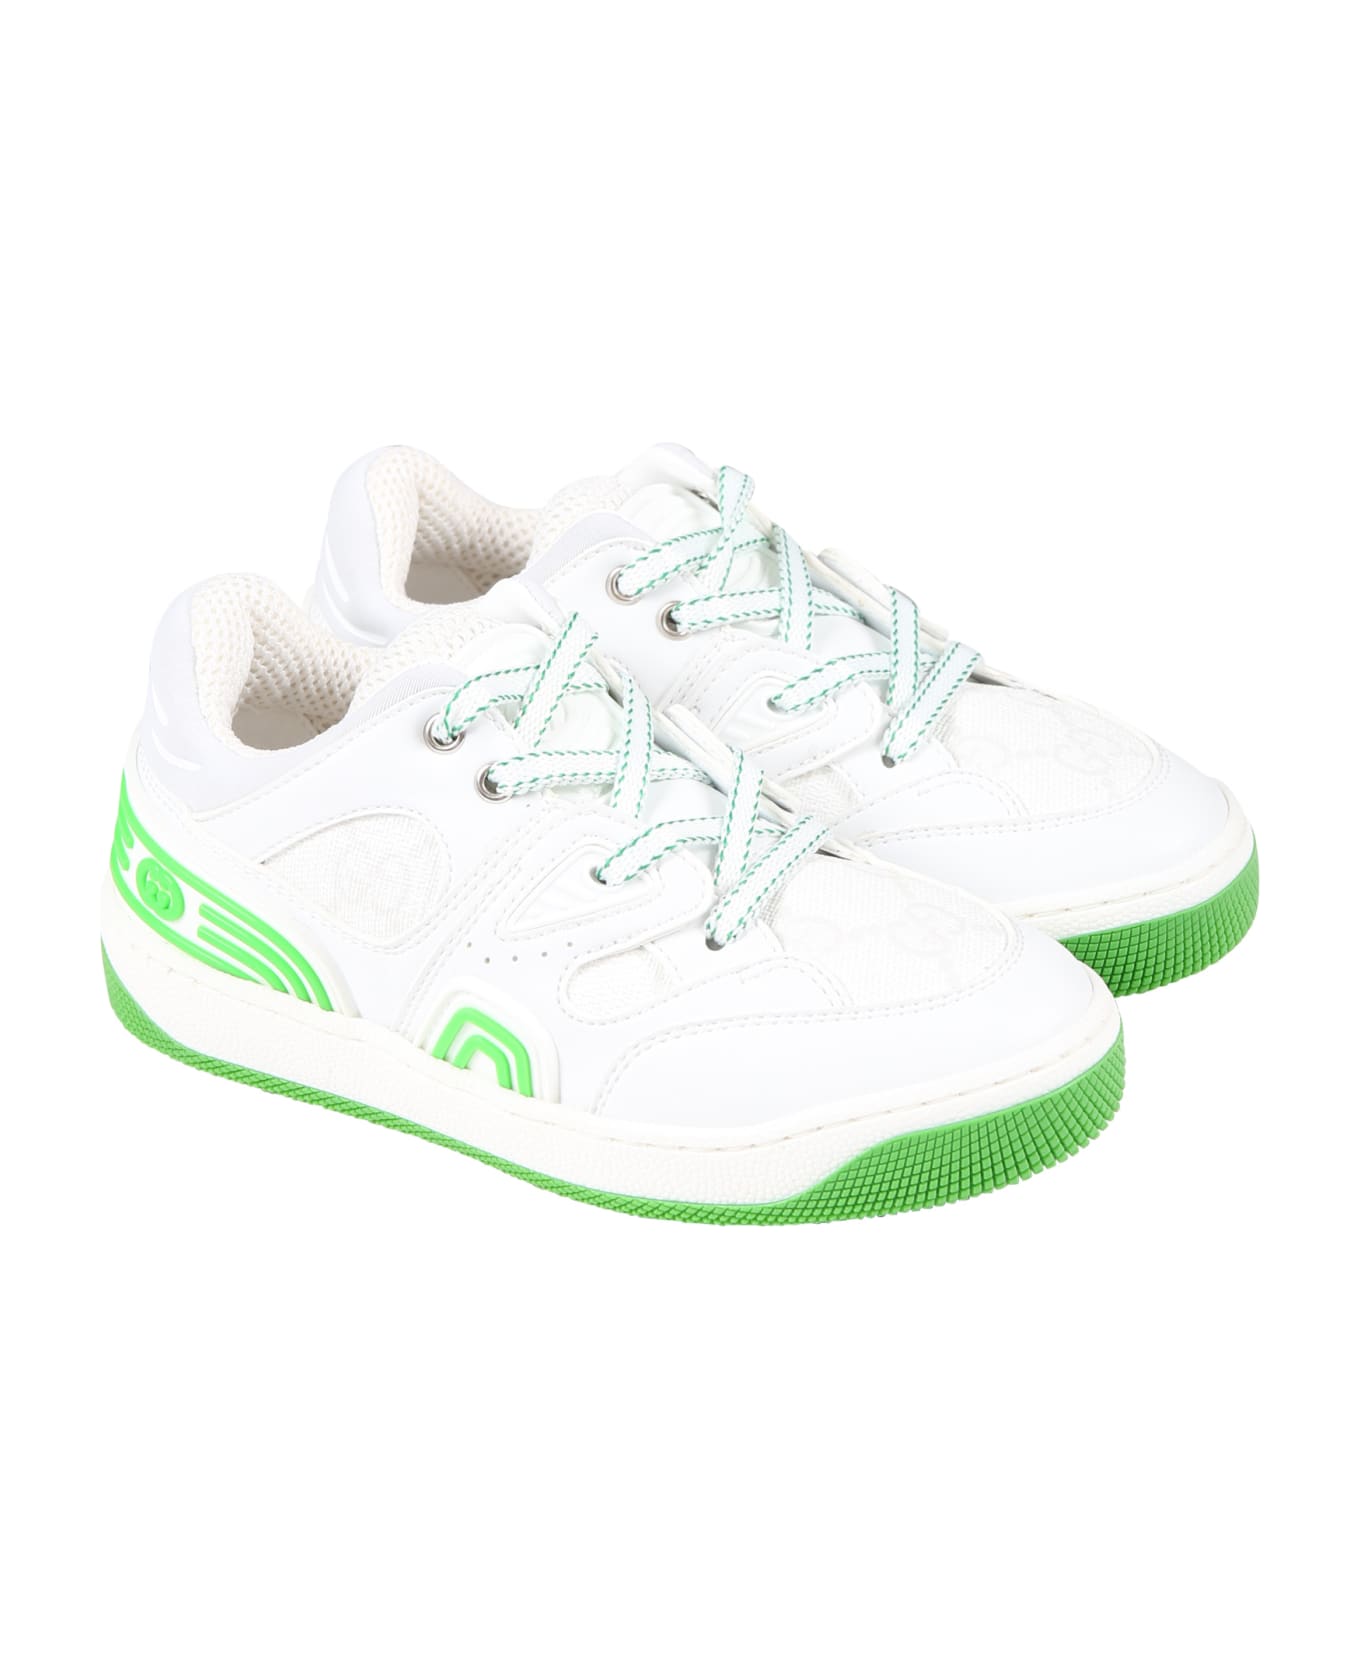 Gucci White Sneakers For Boy With Logo Gg - White シューズ